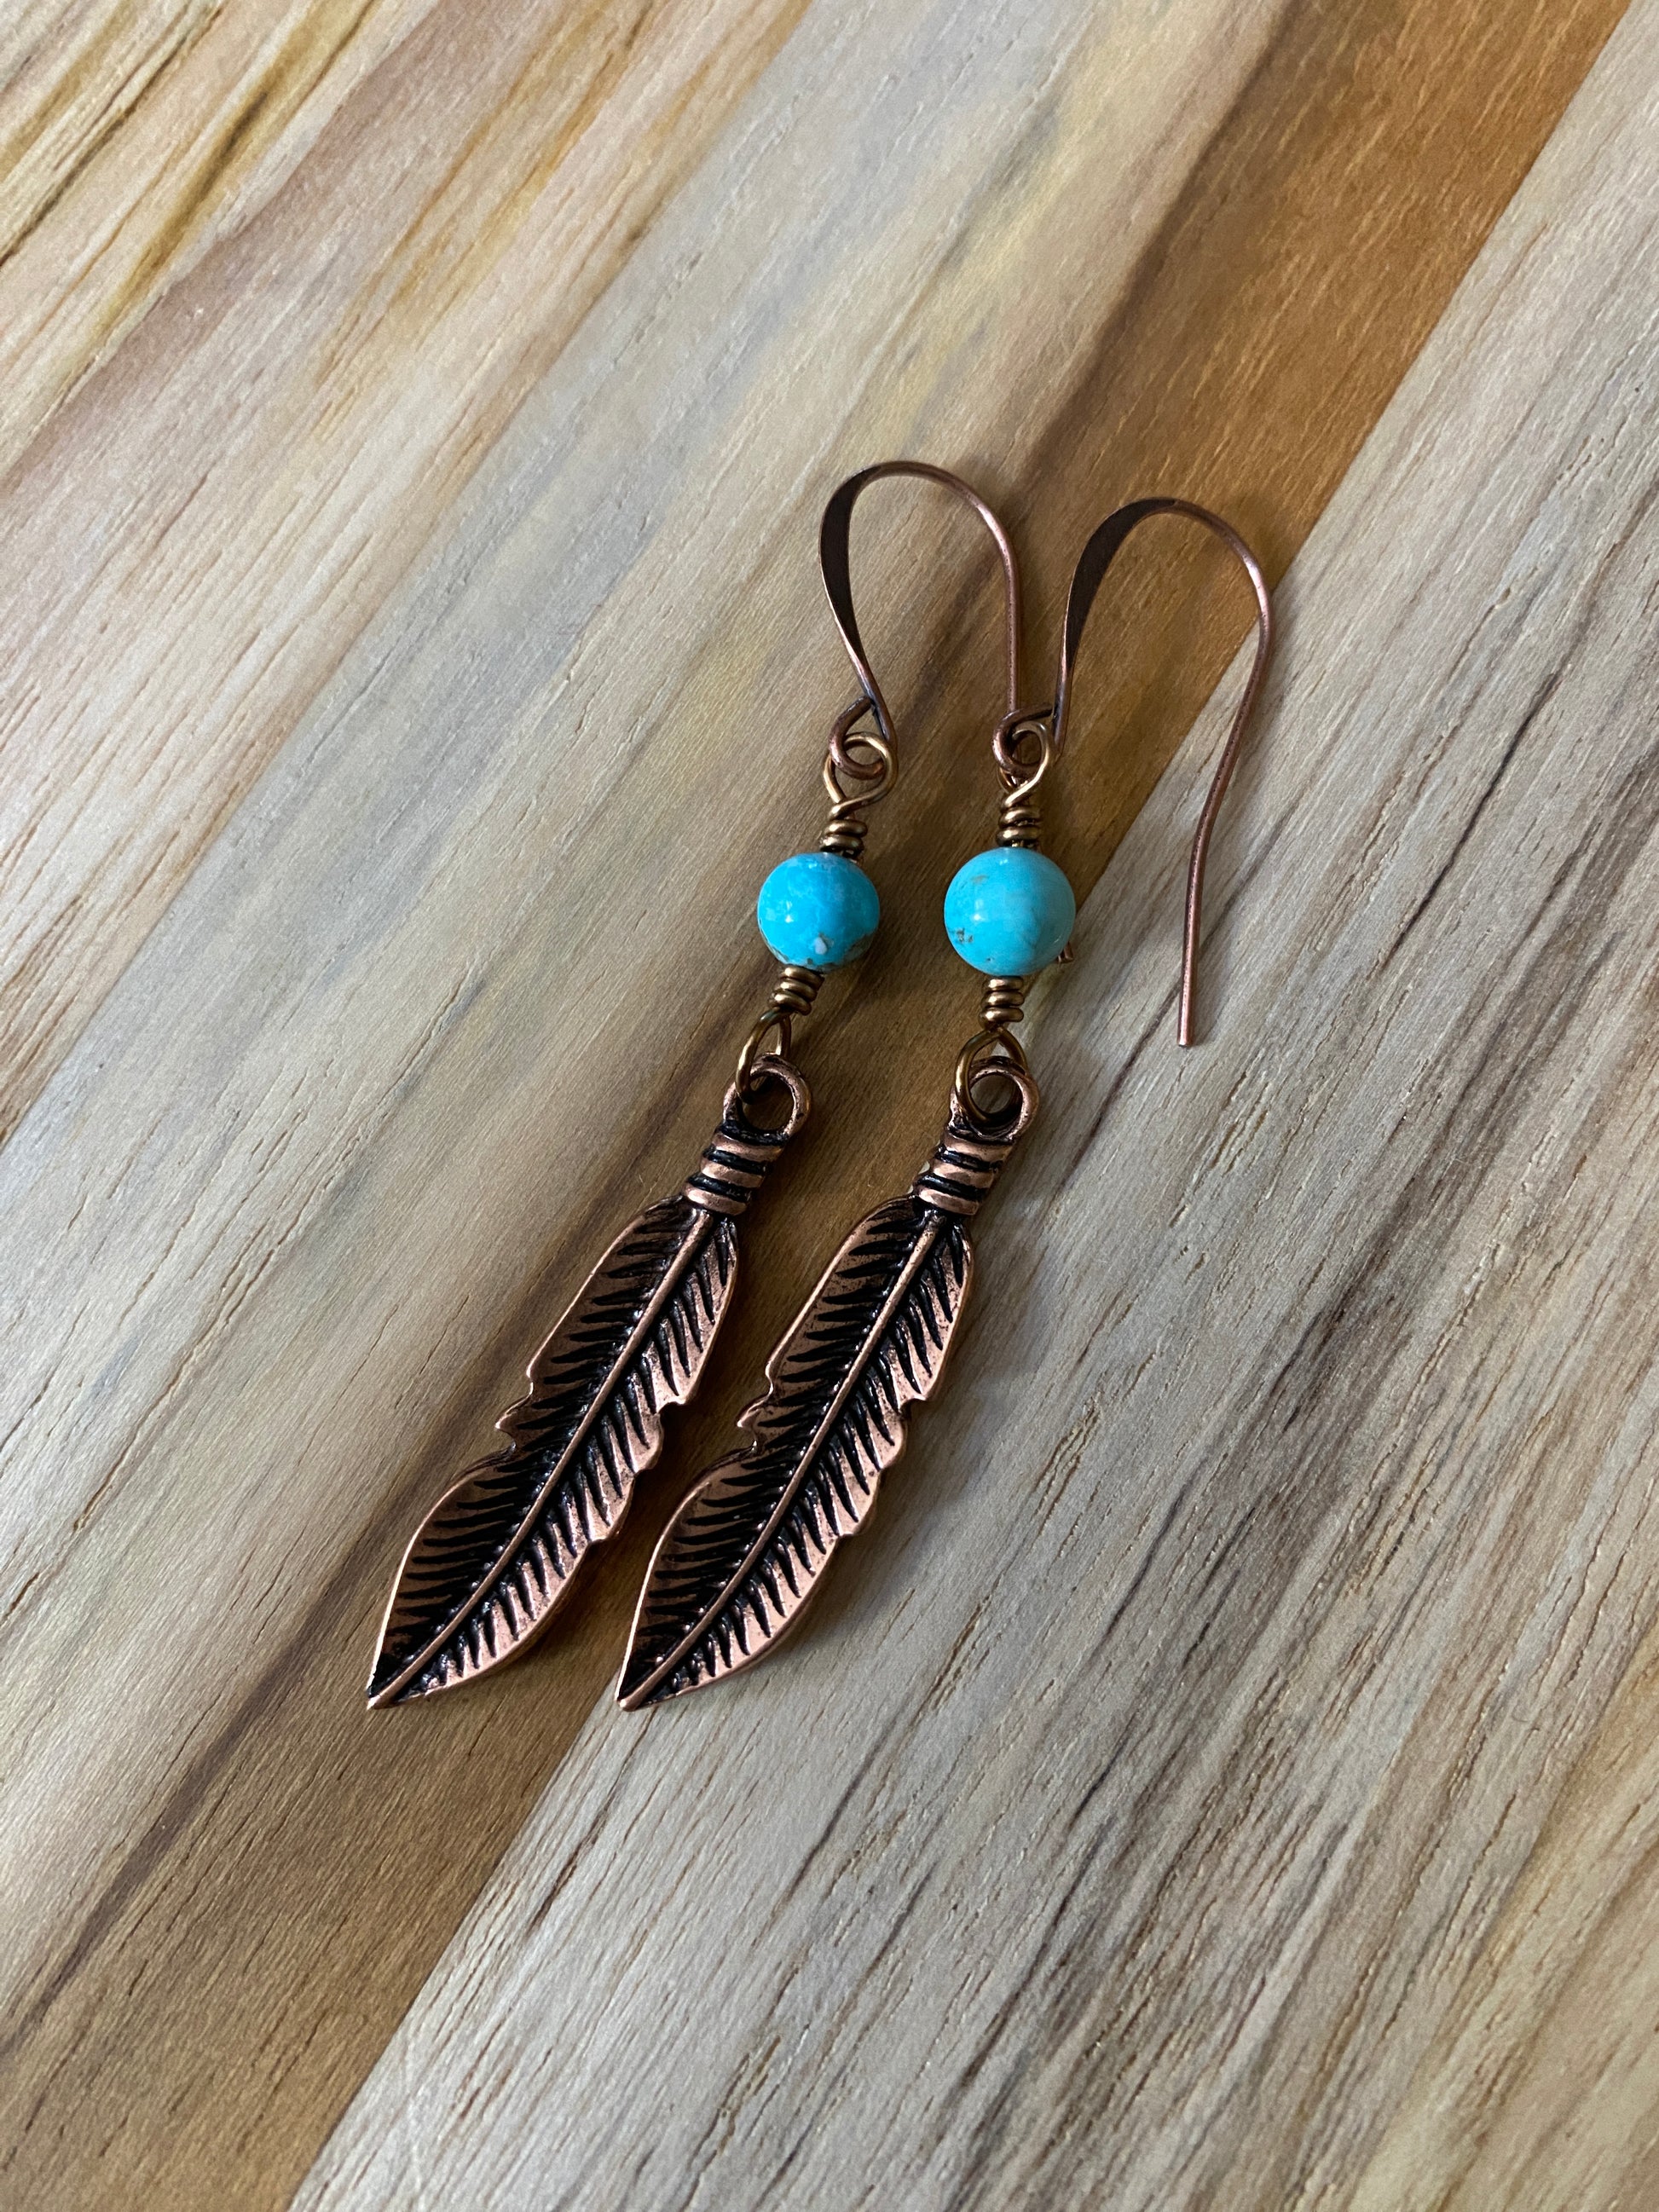 Long Copper Feather Dangle Earrings with Turquoise Bead - My Urban Gems